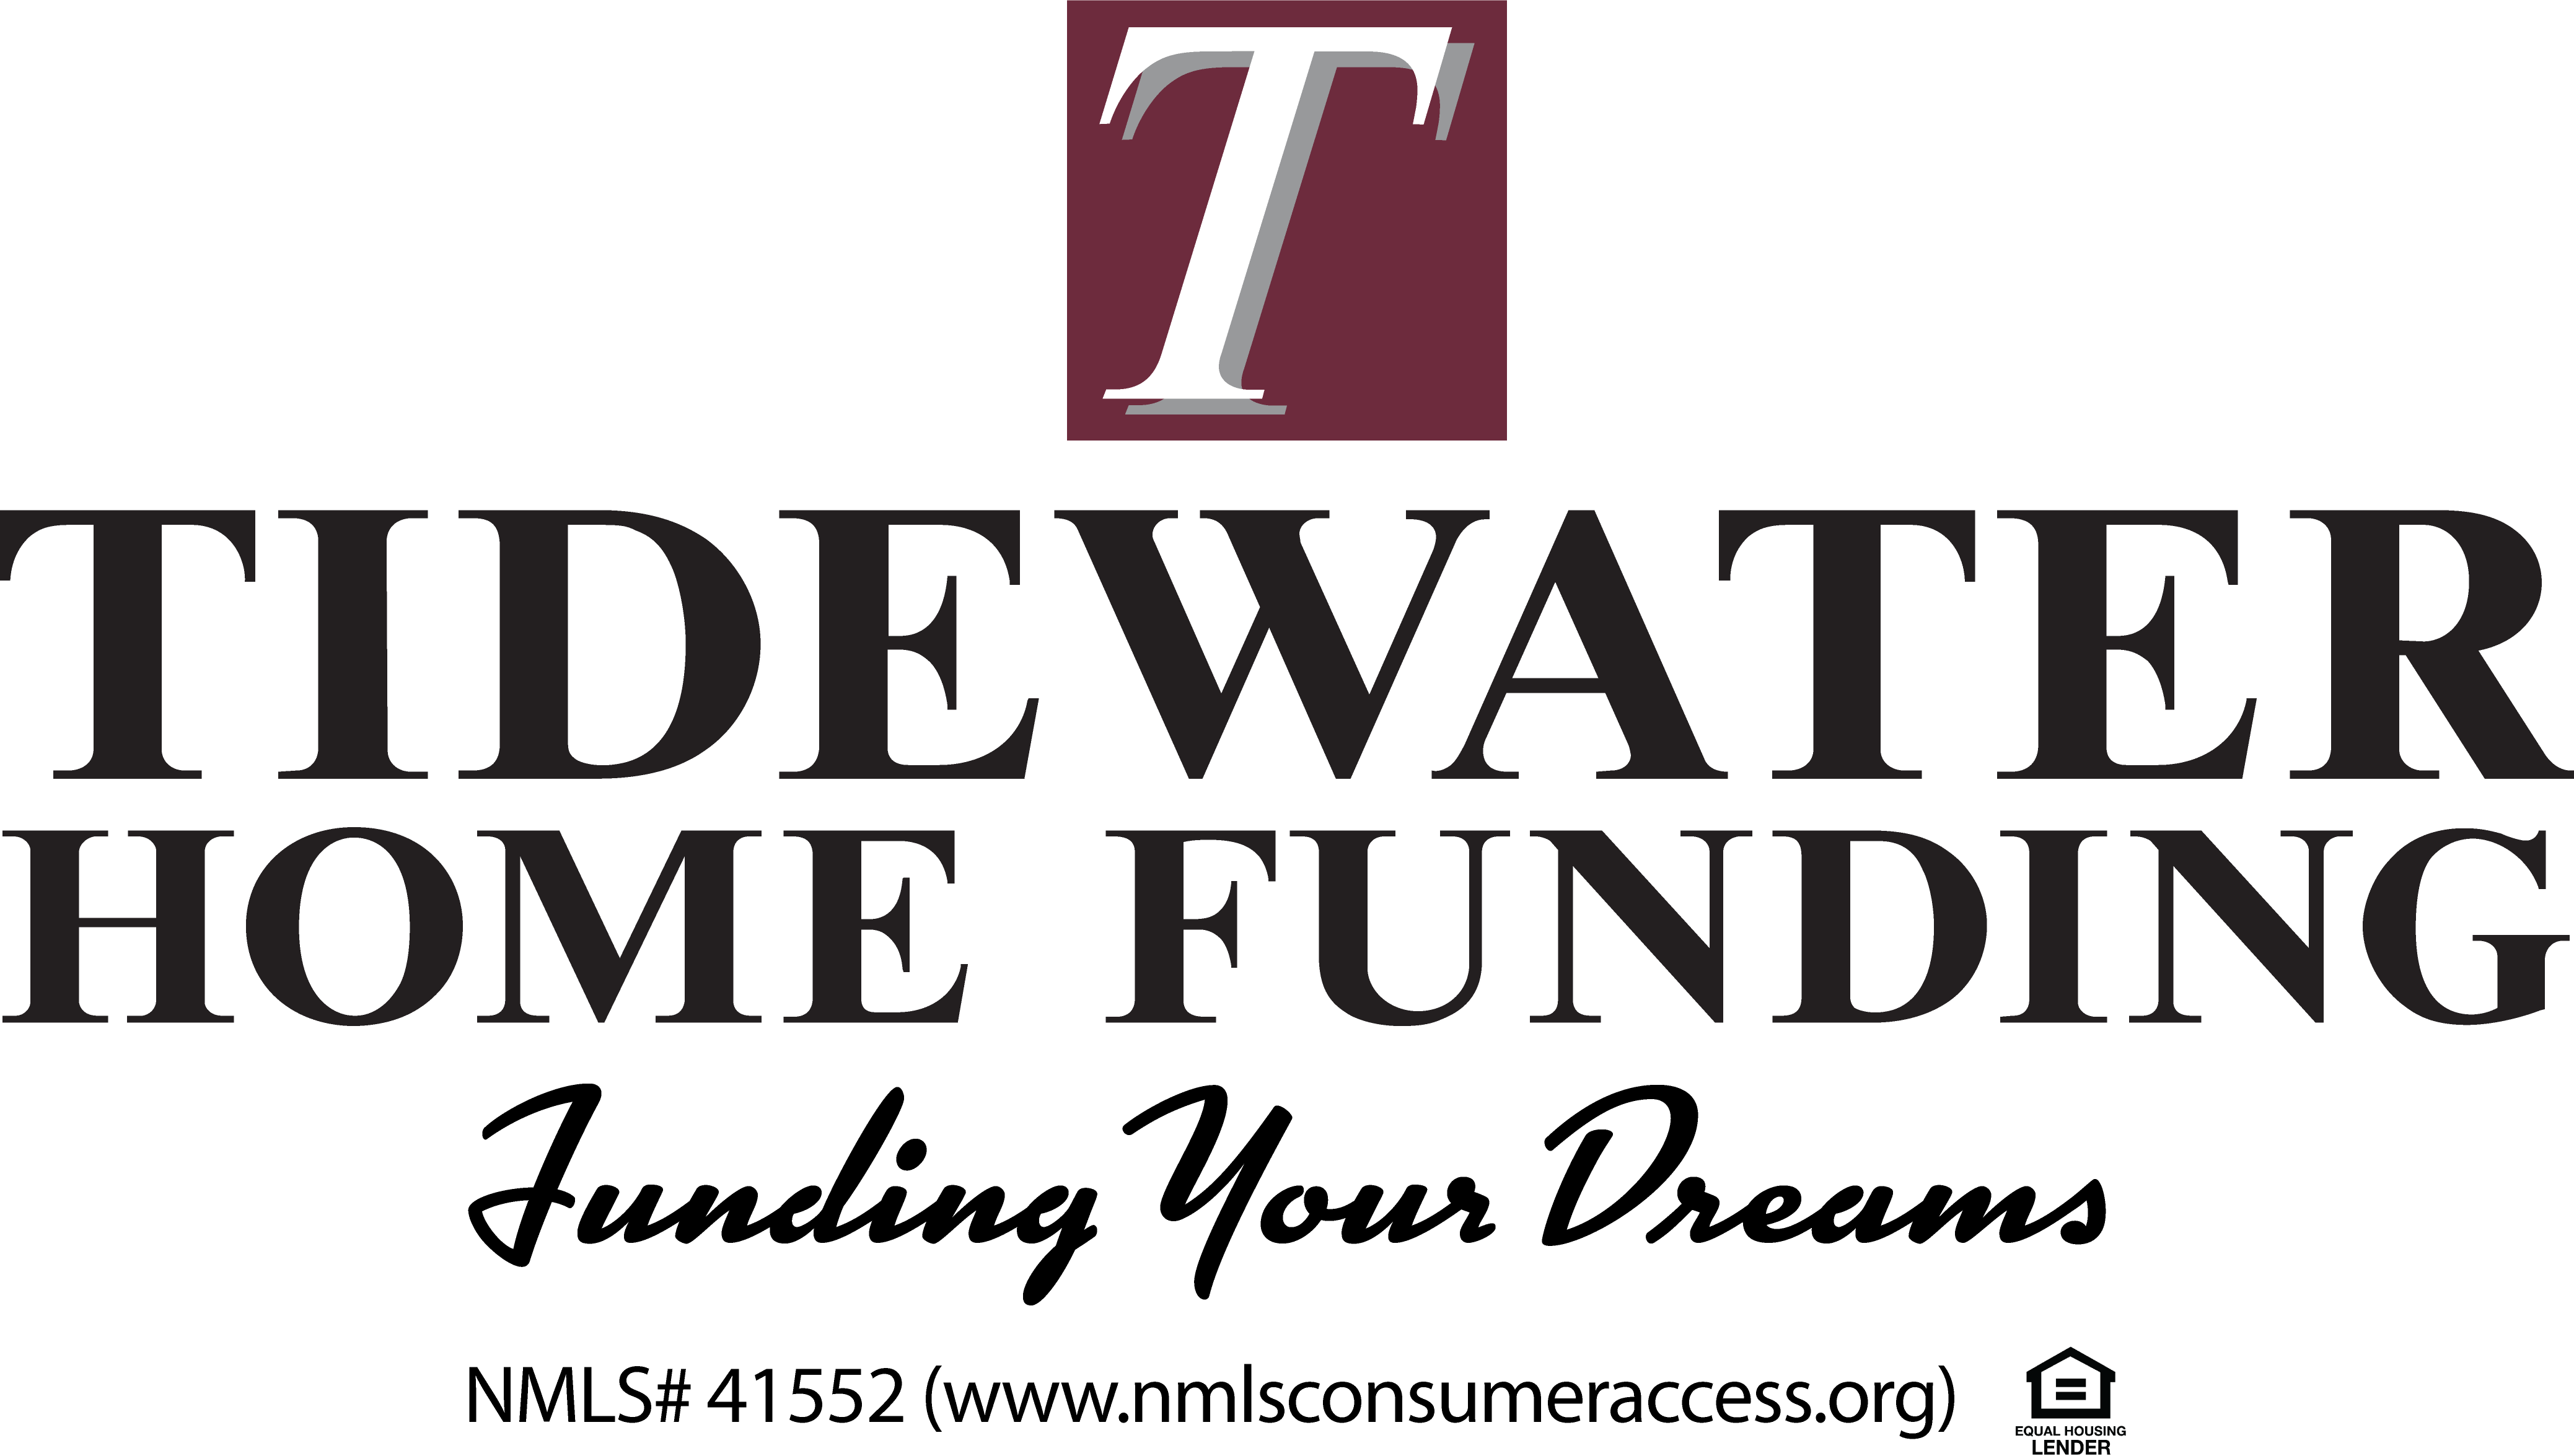 Tidewater Home Funding 